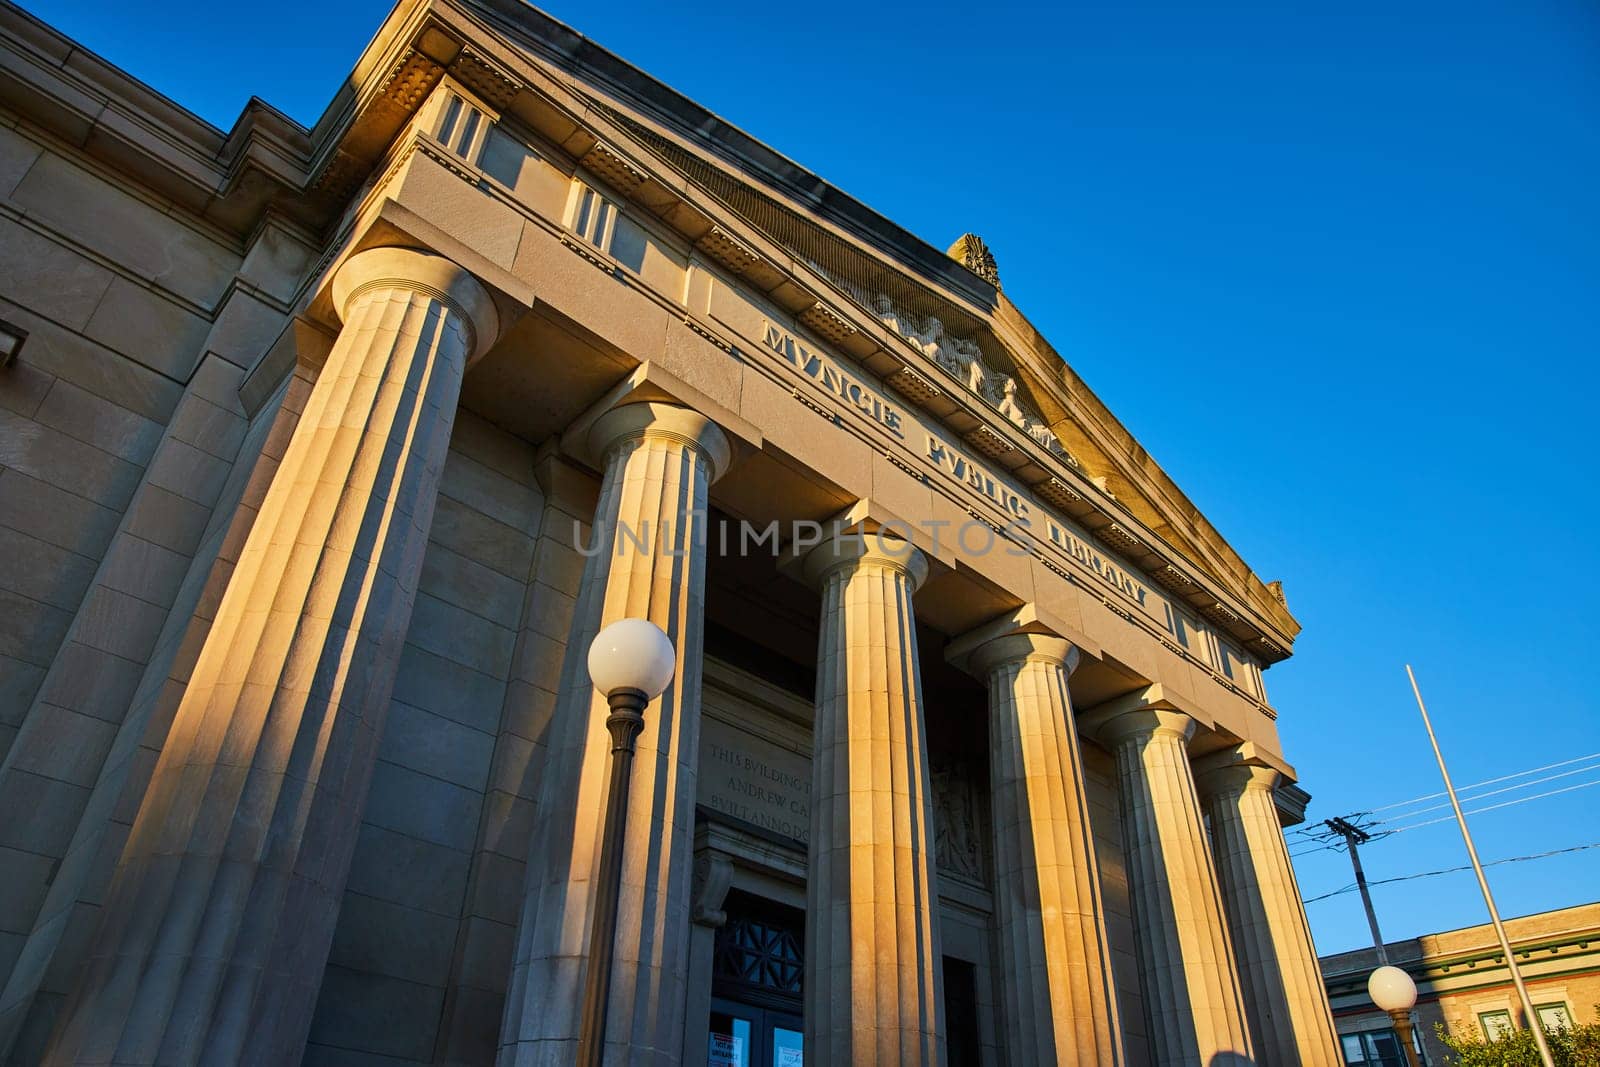 Golden hour sunrise illuminates the grand architecture of Muncie Public Library, Indiana, showcasing its ornate columns and stonework against a clear blue sky.